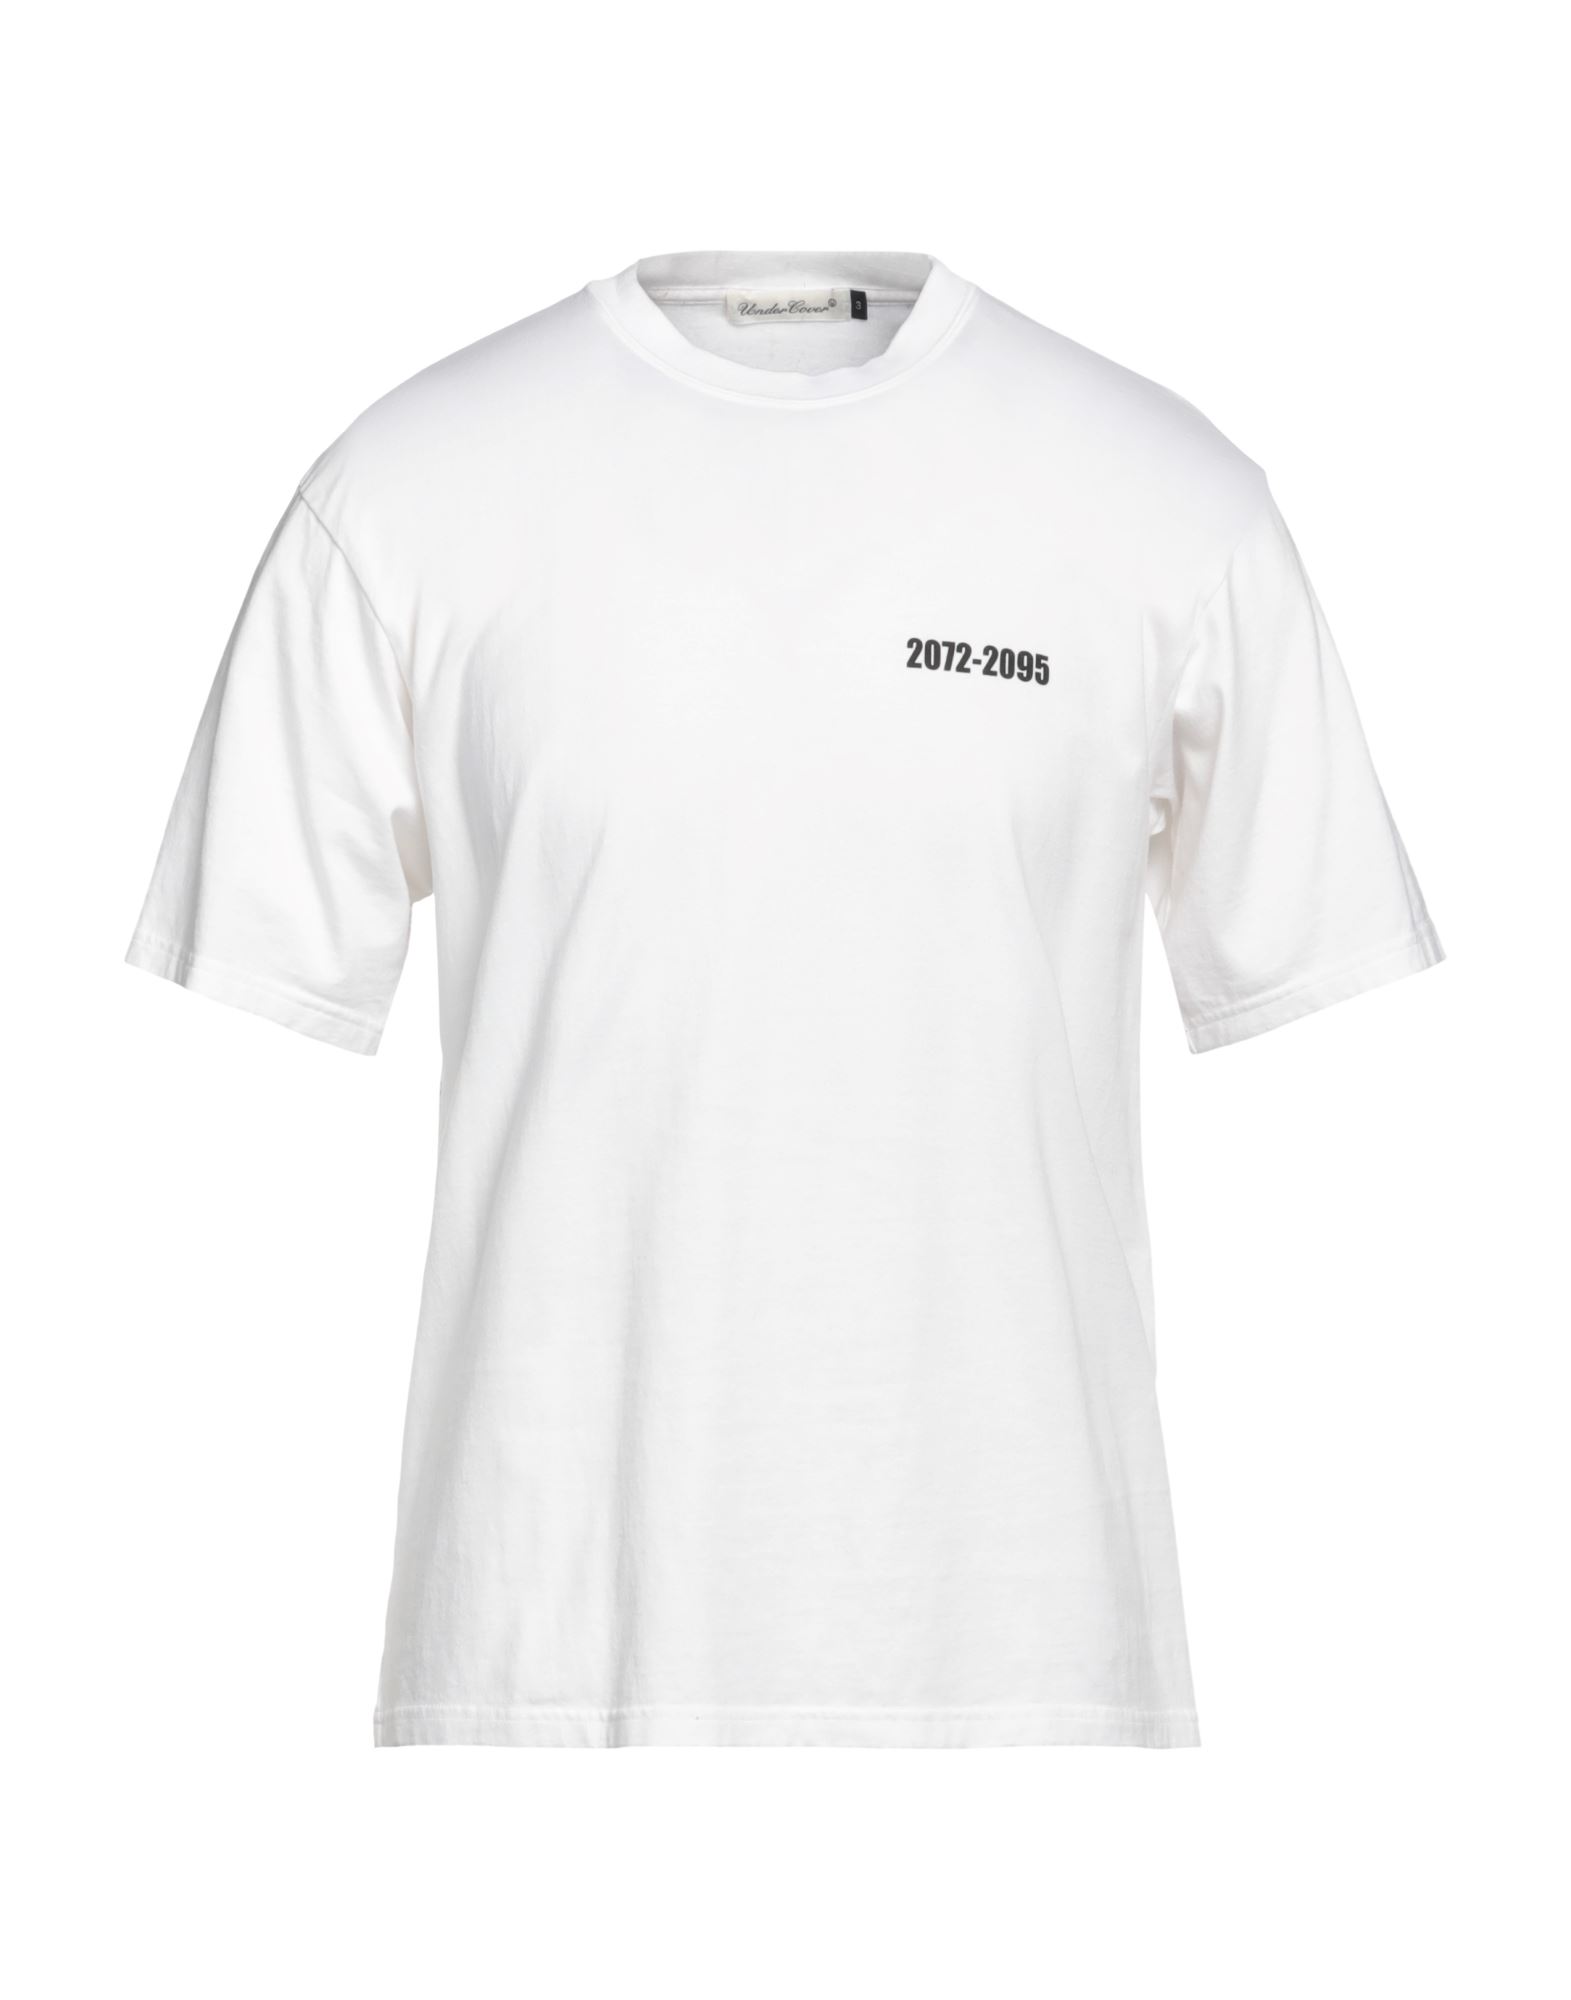 UNDERCOVER UNDERCOVER MAN T-SHIRT WHITE SIZE 4 COTTON